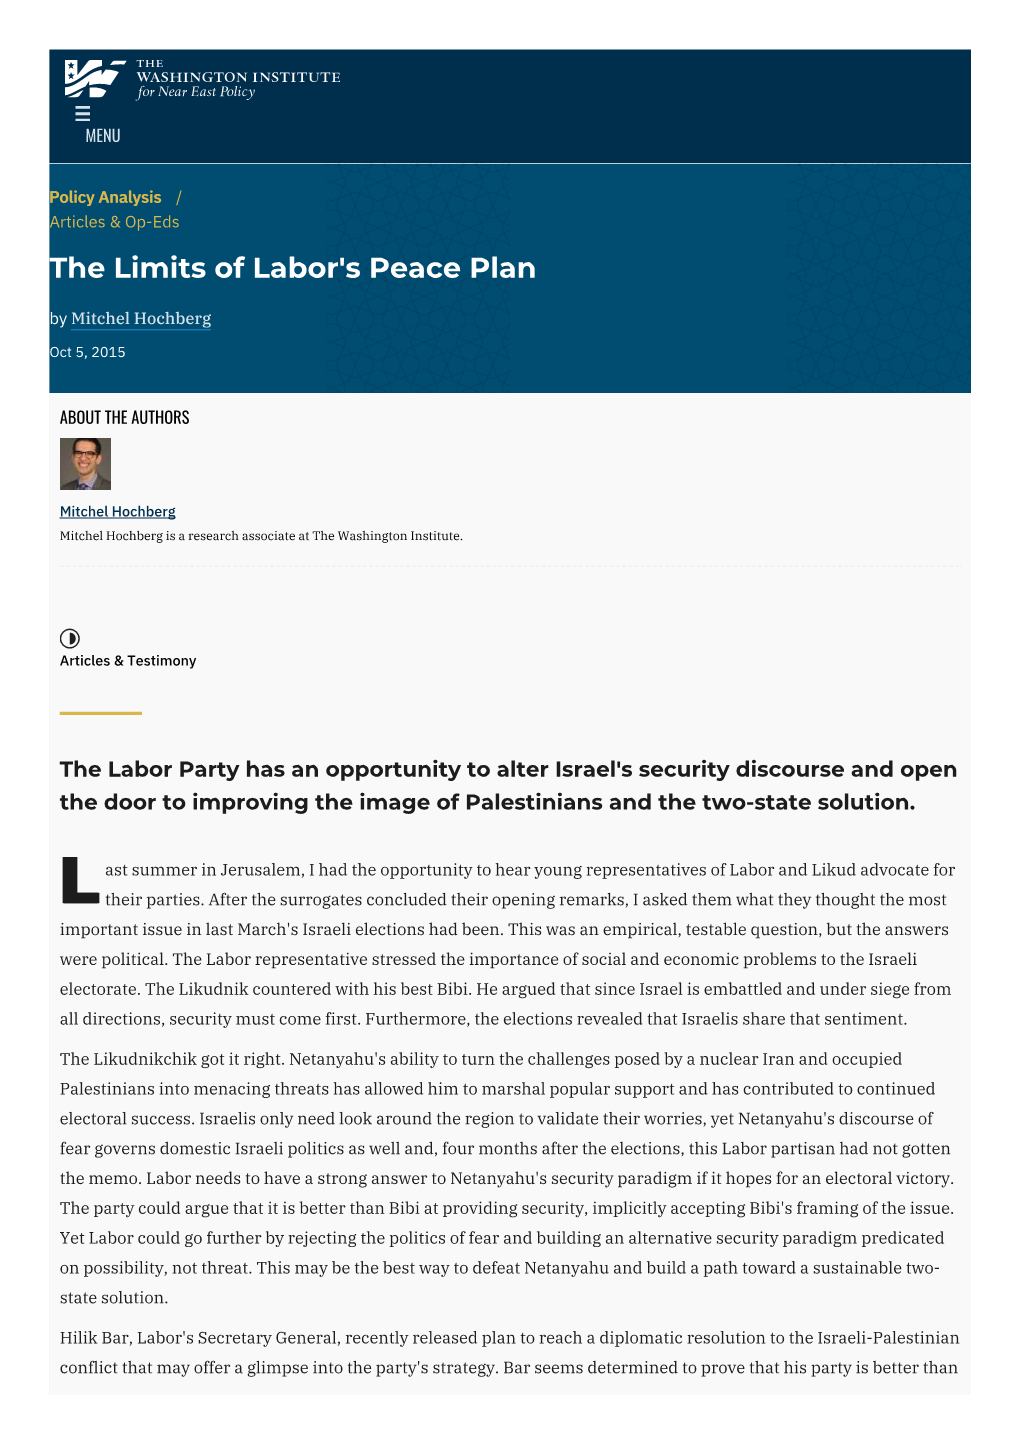 The Limits of Labor's Peace Plan | the Washington Institute